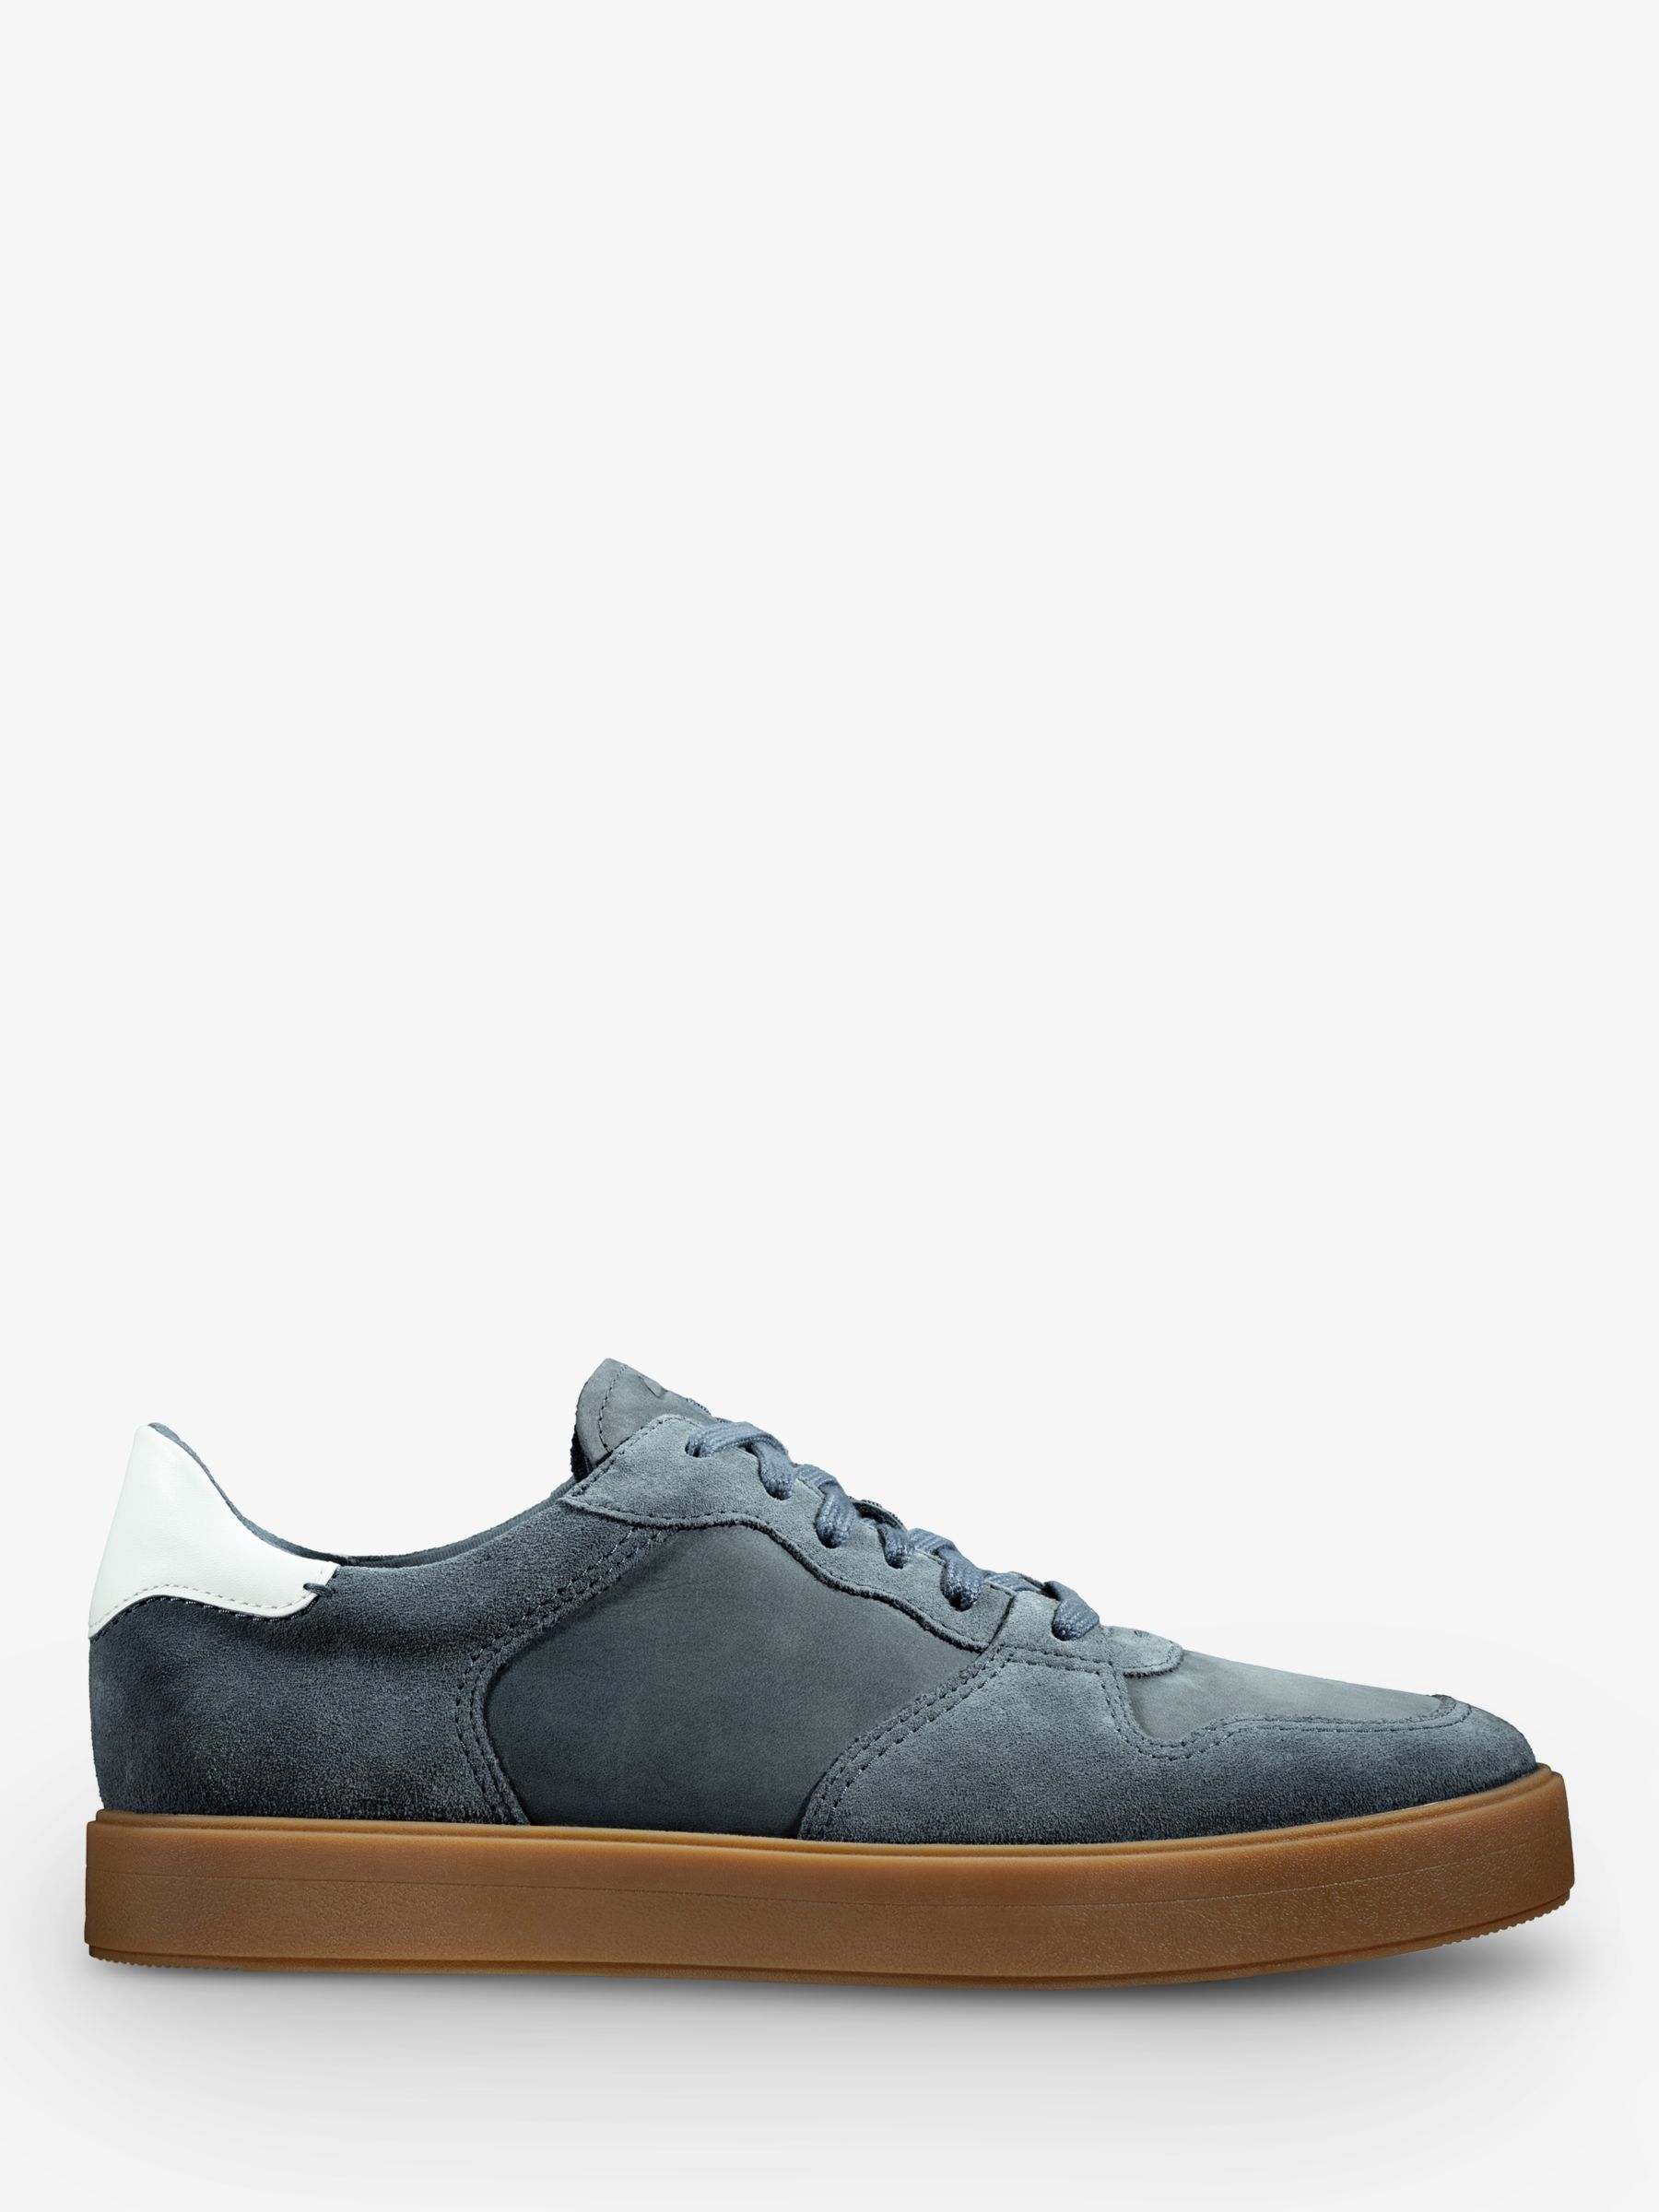 Clarks Hero Jump Suede Trainers, Blue at John Lewis & Partners